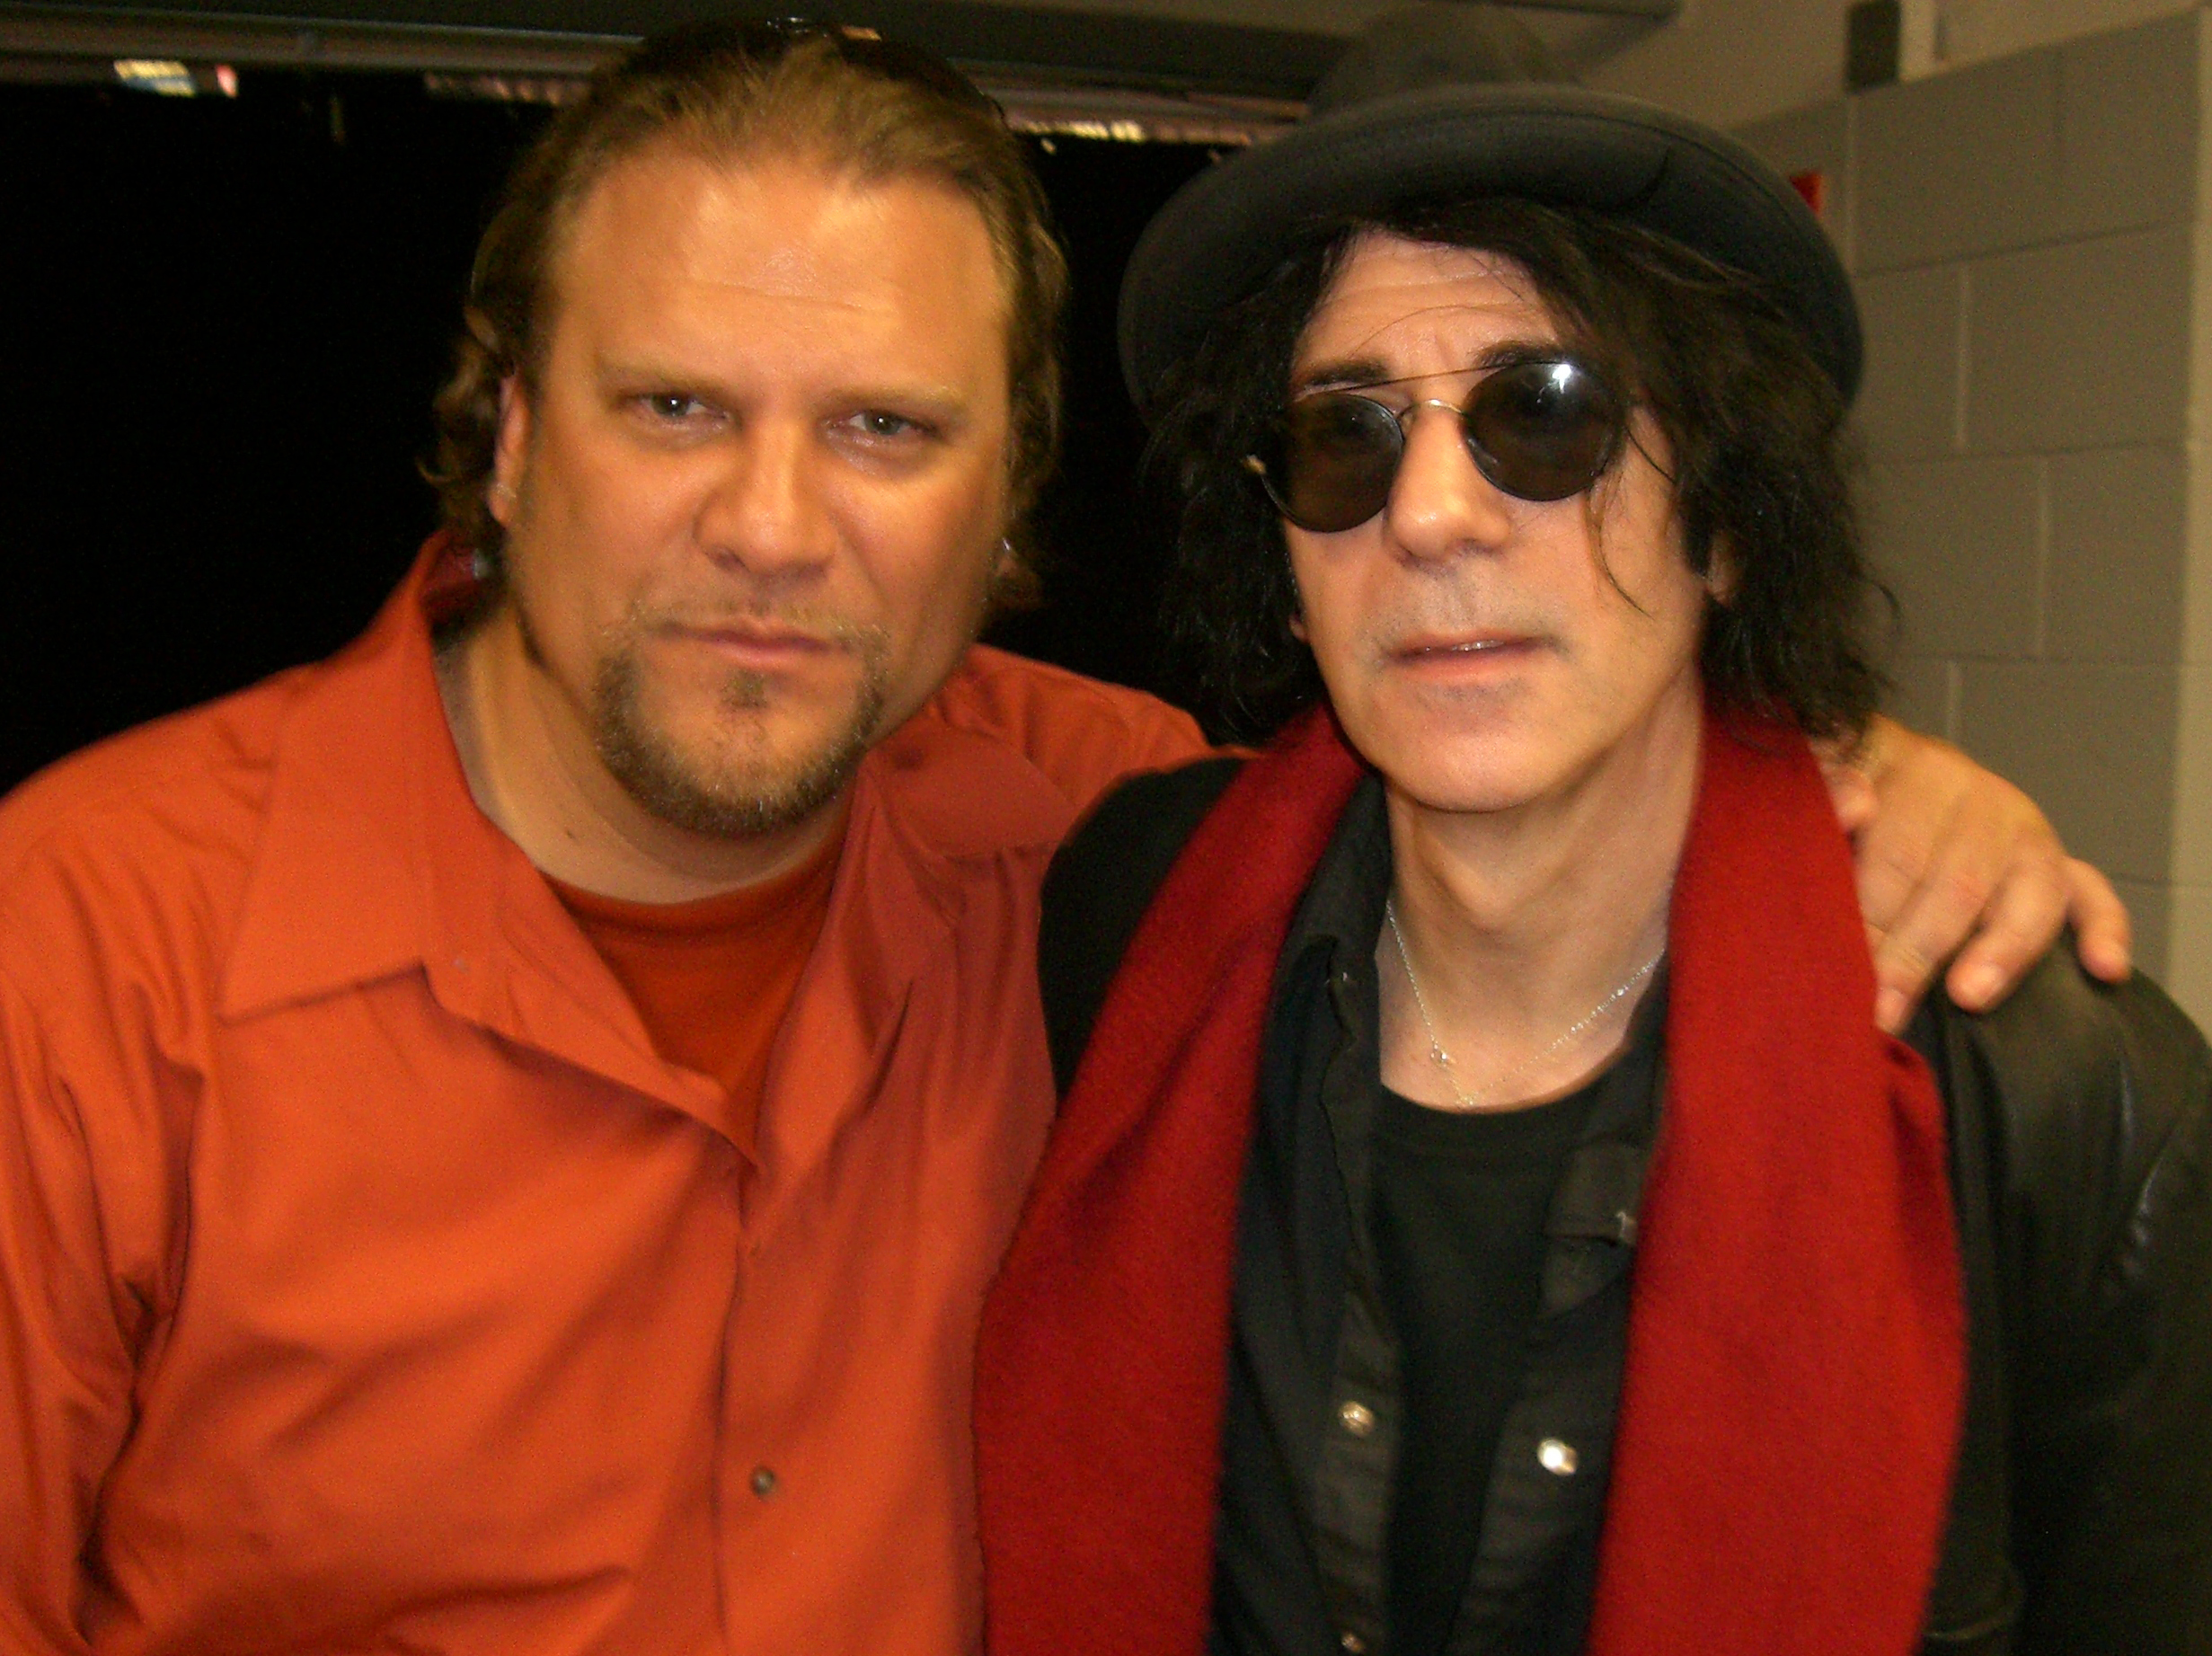 Peter Wolf lead vocalist for the J. Geils Band, and Mike Quinn